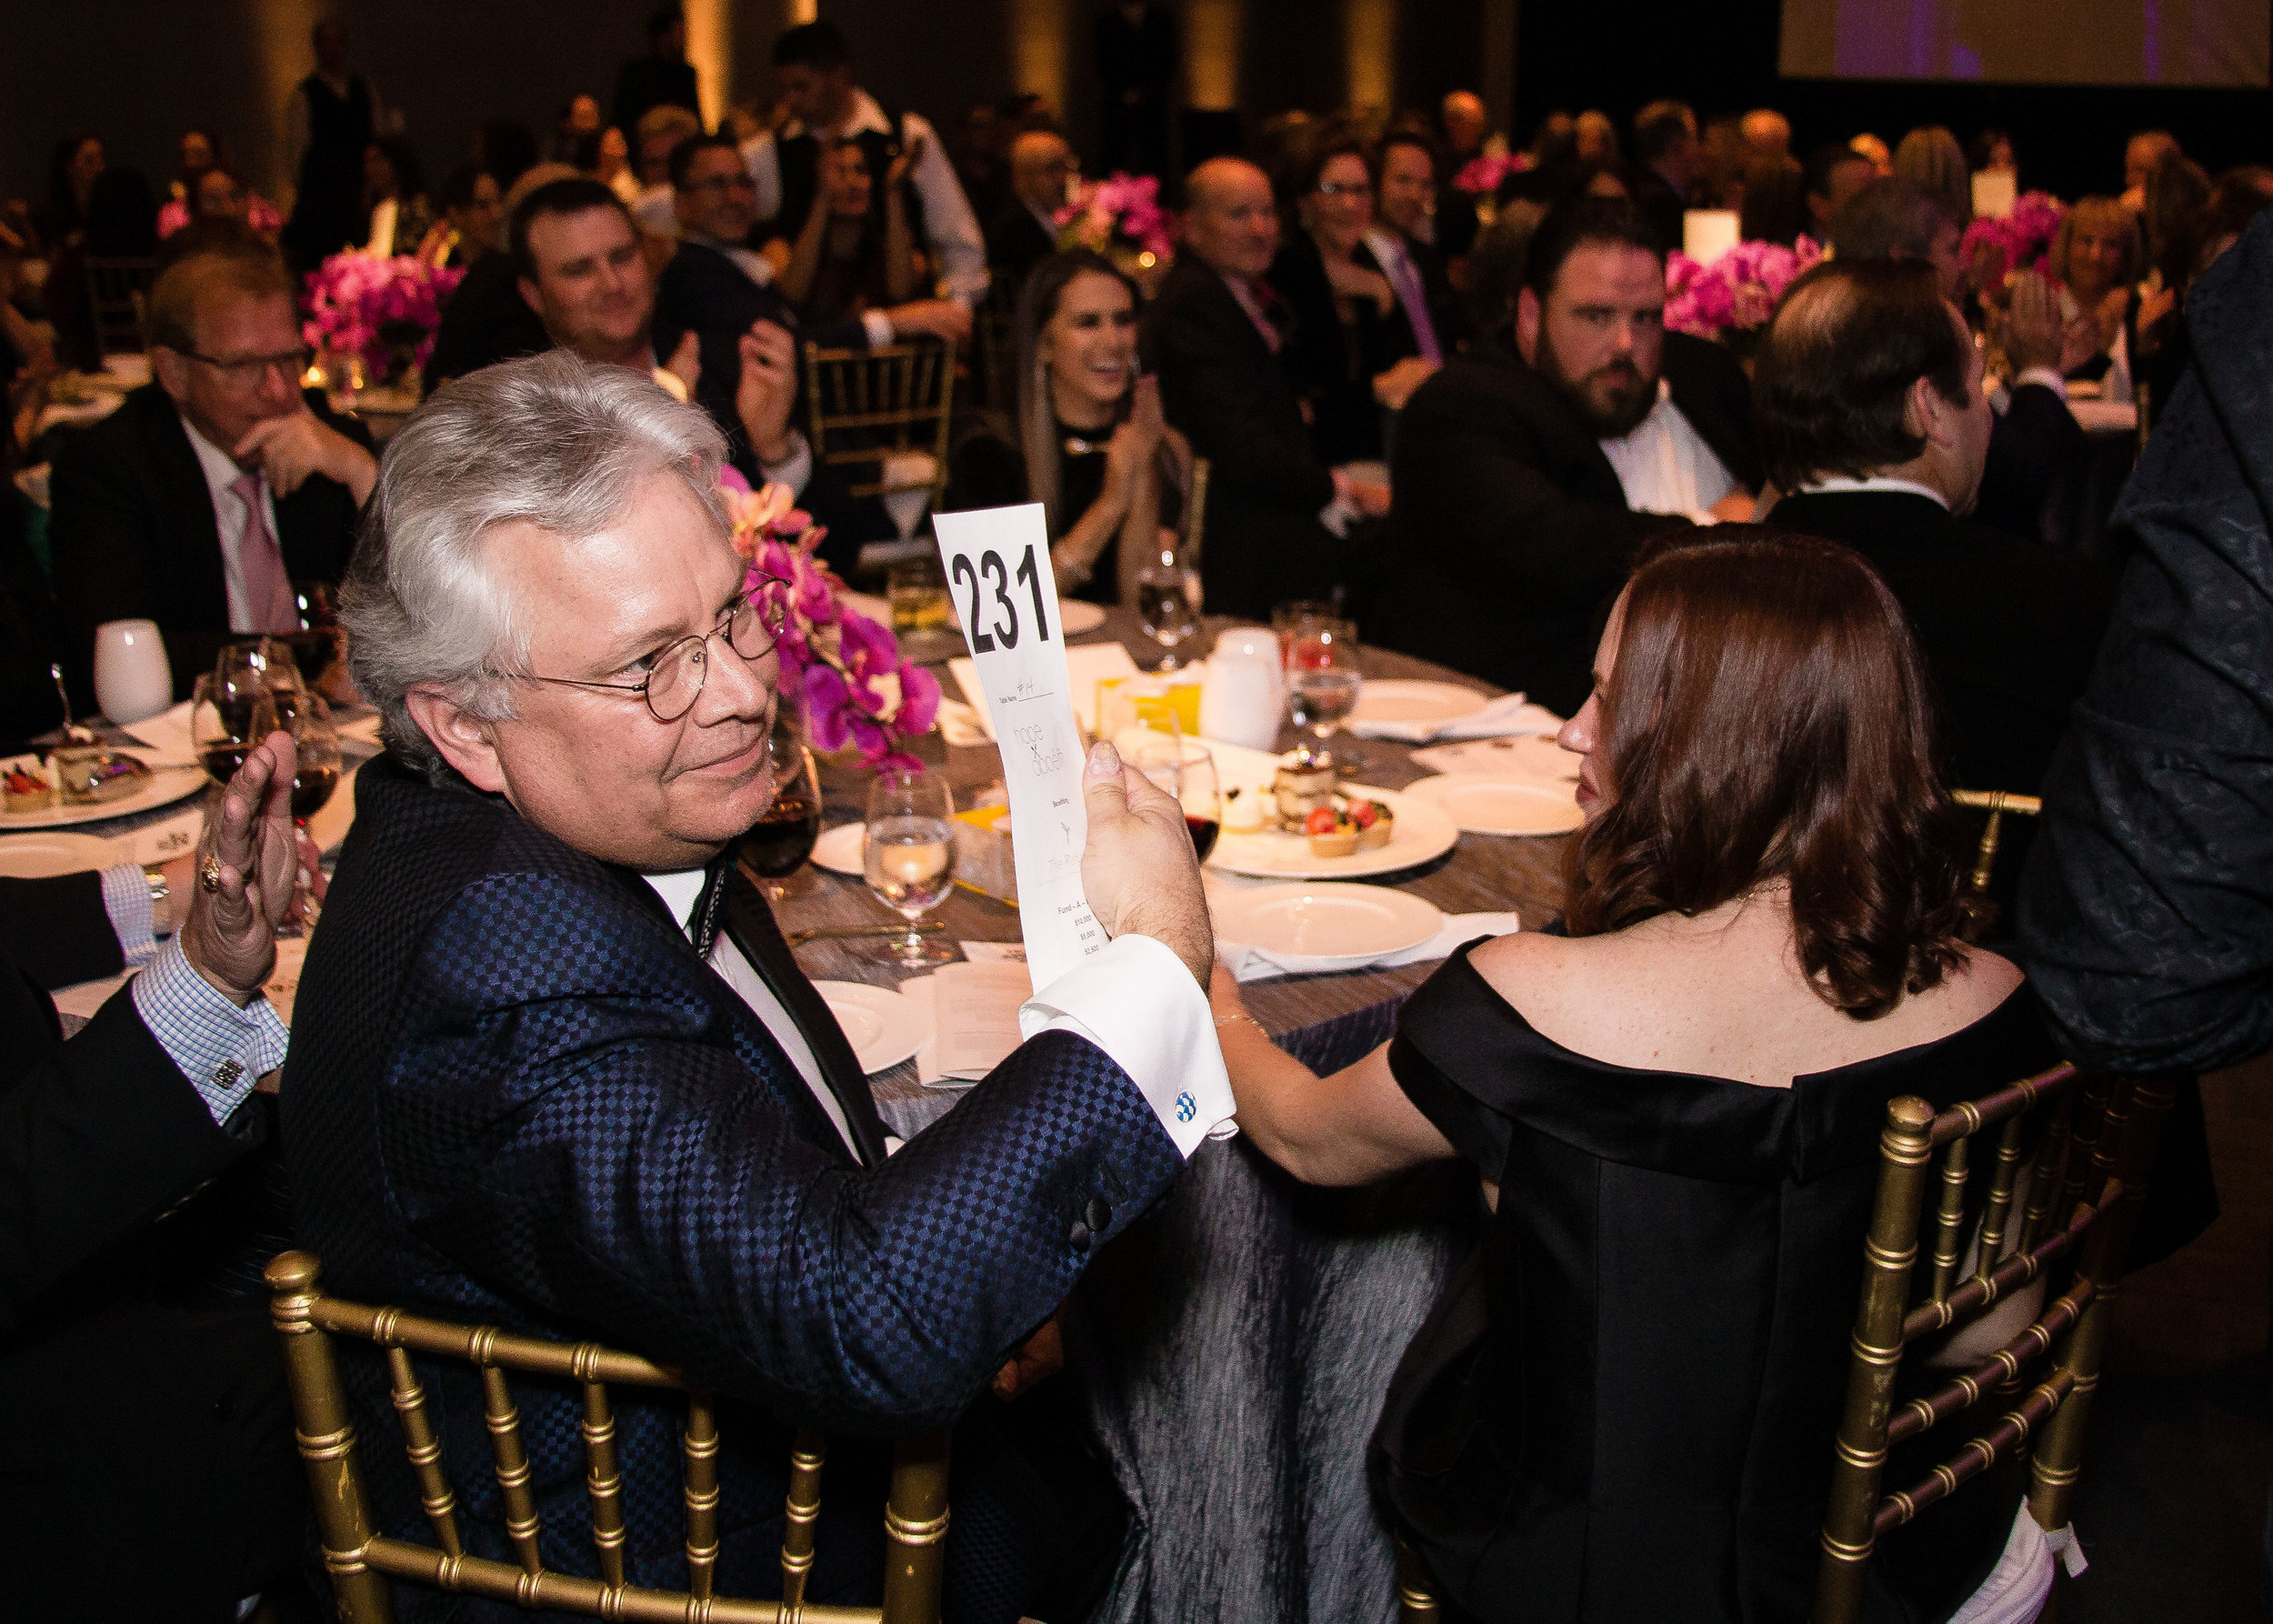  The Hope Appétit 2019 gala was made possible thanks to the generous support of Dirk and Katie Dozier, Margaret and Don Collis, the Bill Taylor Family, and the rest of our sponsors.  Photos by    Brandi Lacey Photography    and   Amy Hicks Photograph